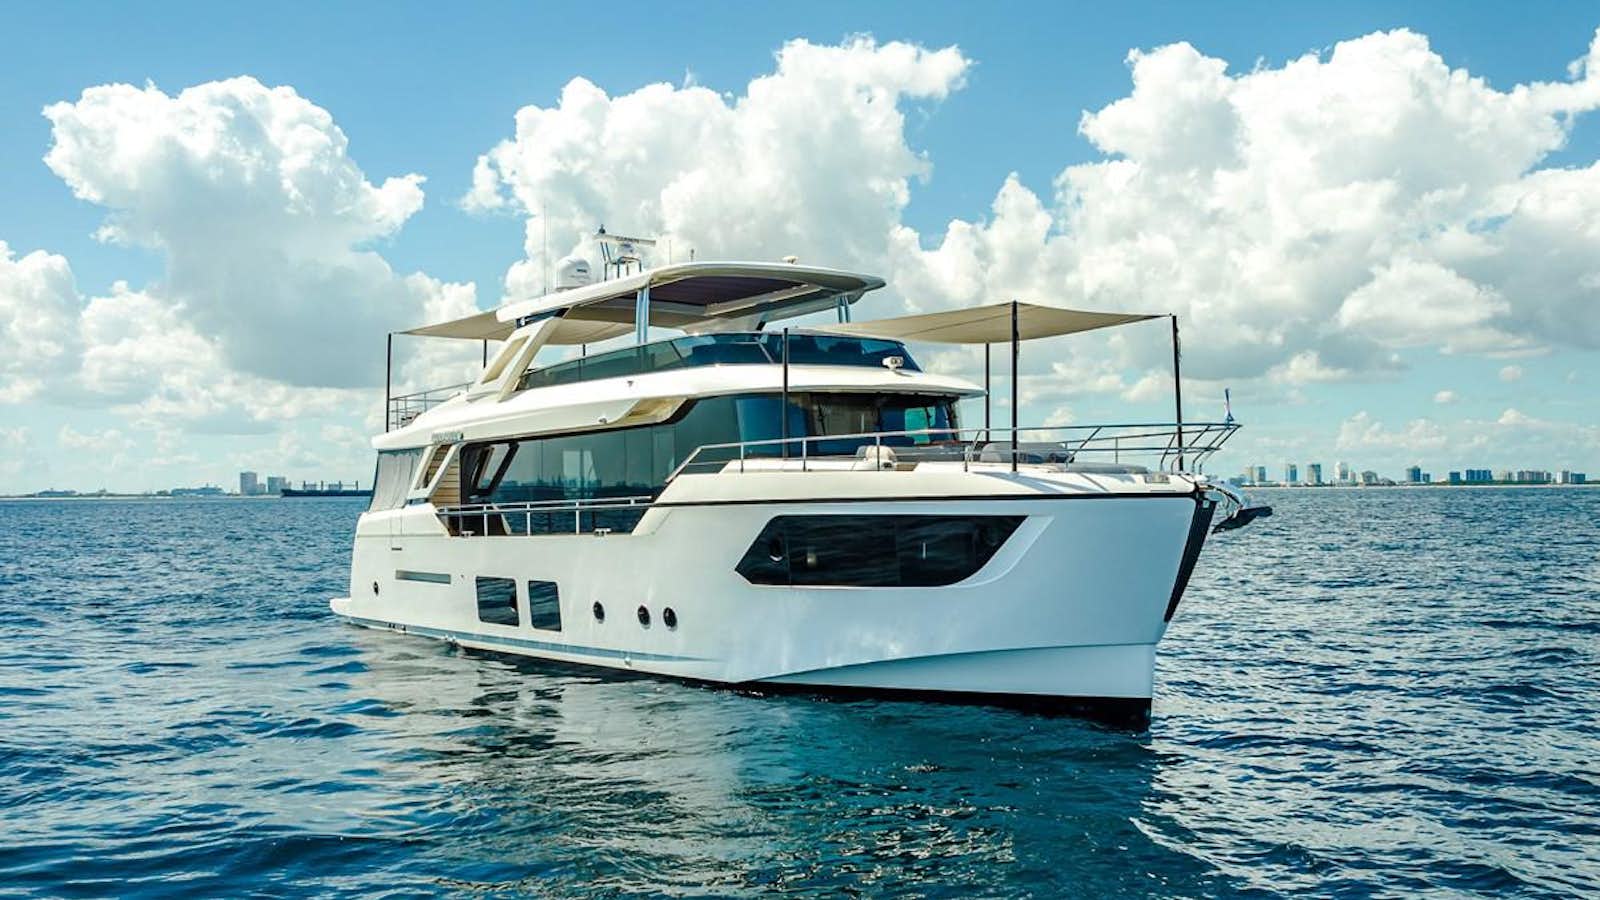 Watch Video for AQUARIUS Yacht for Sale